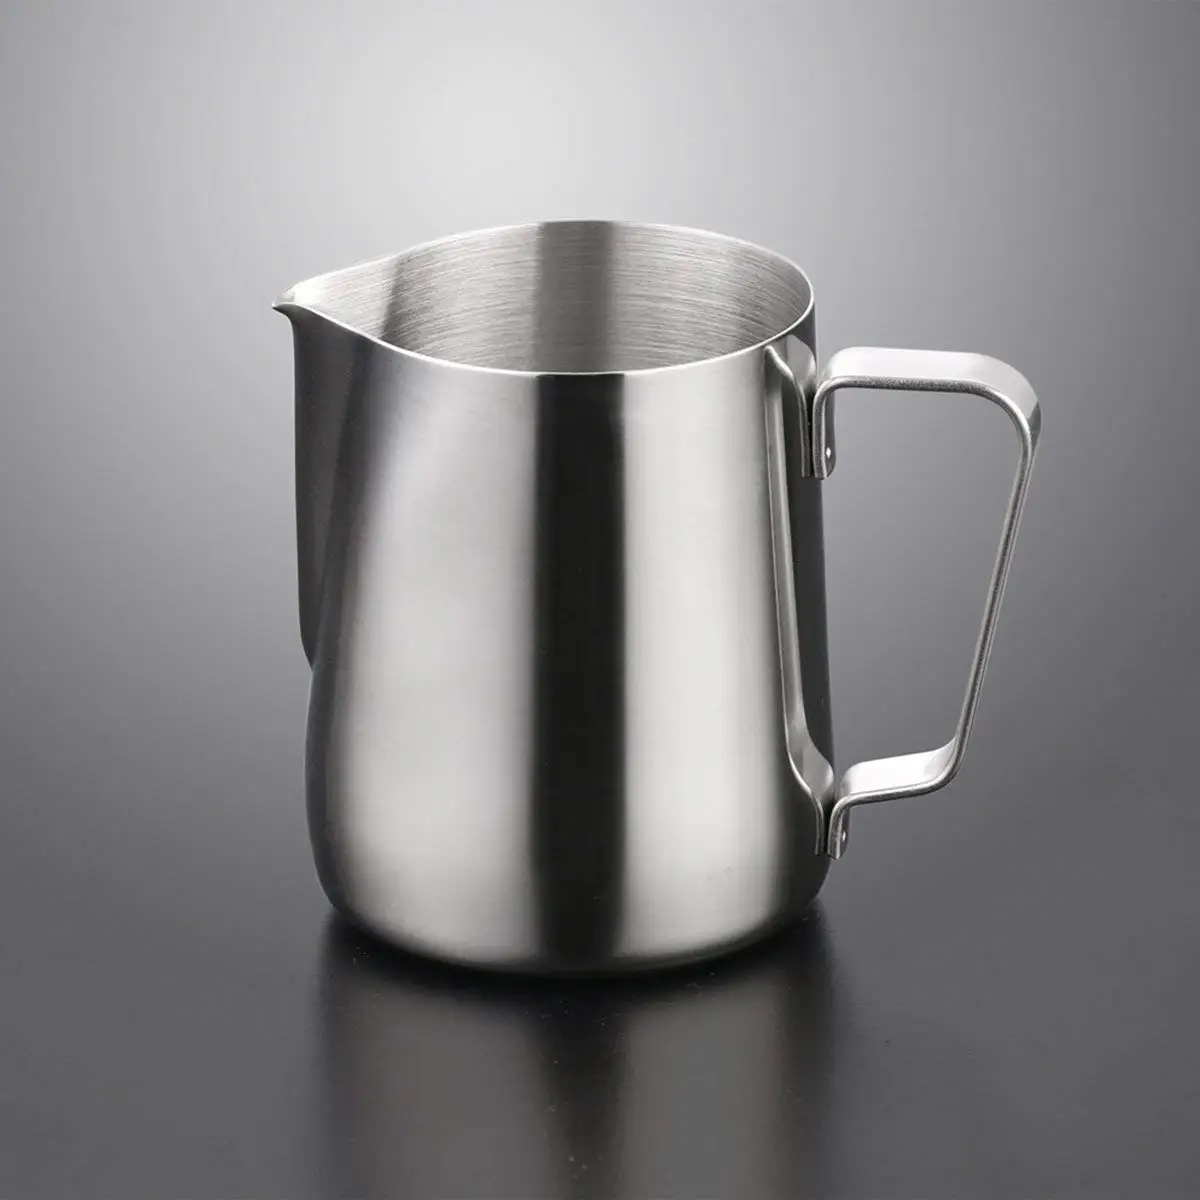 Milk Frothing Jug 600ml Japanese Type Thicken Stainless Steel Conical Pitcher Cup for Barista Cappuccino Espresso Coffee Cafe Latte Art